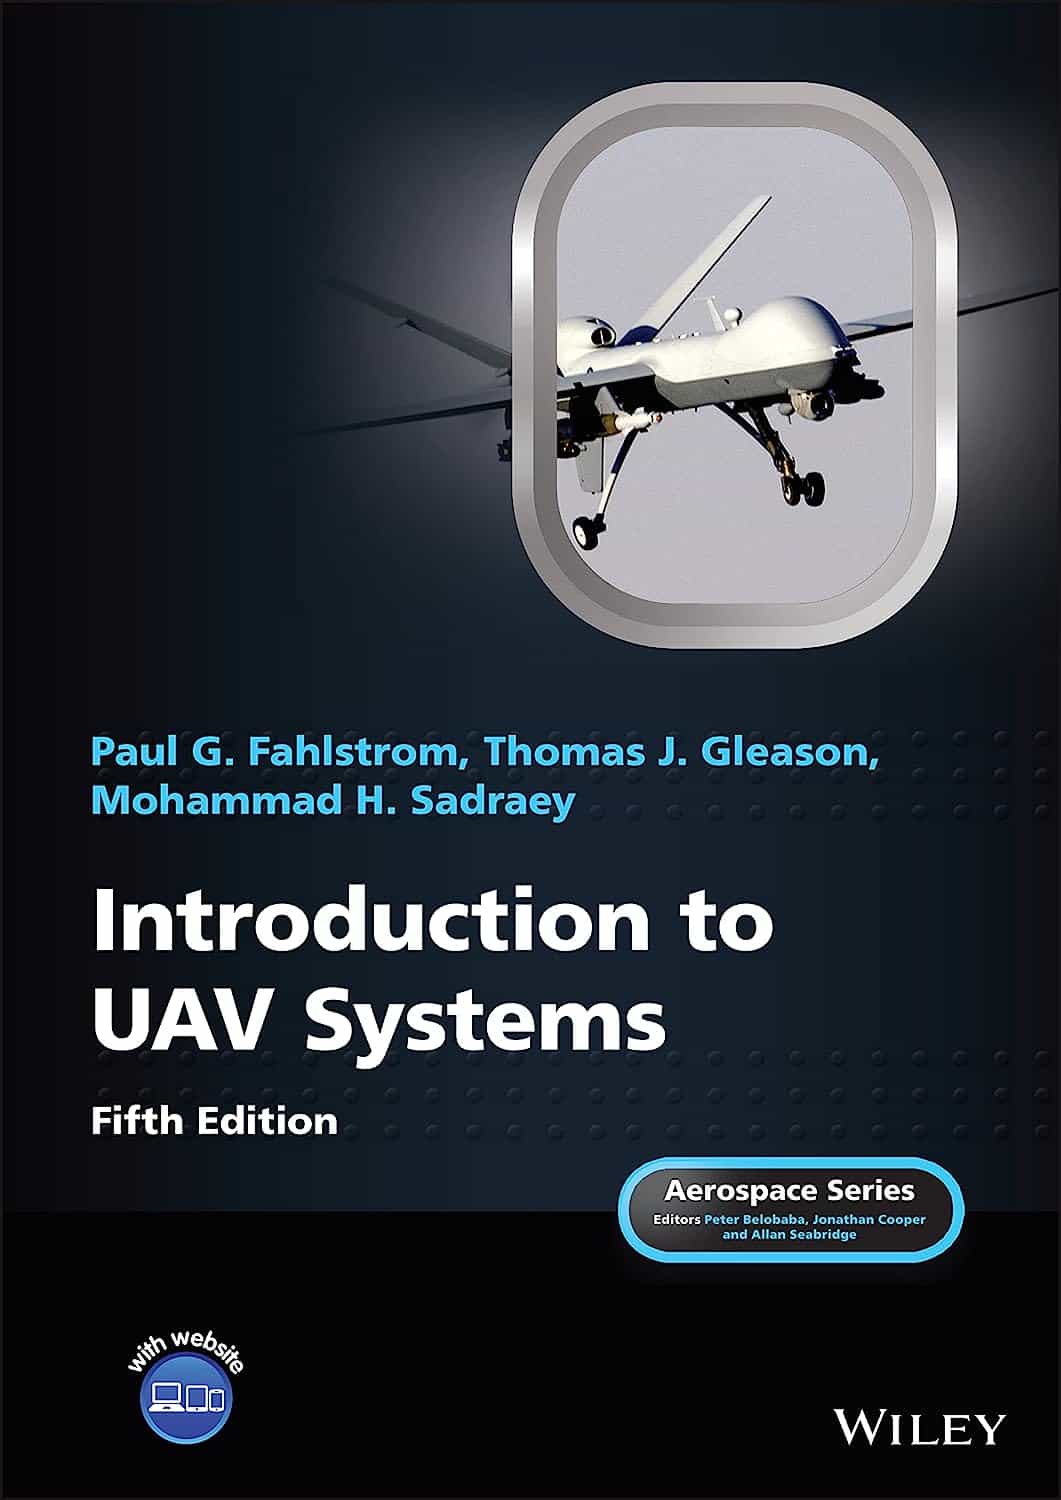 introduction to uav systems (aerospace series)